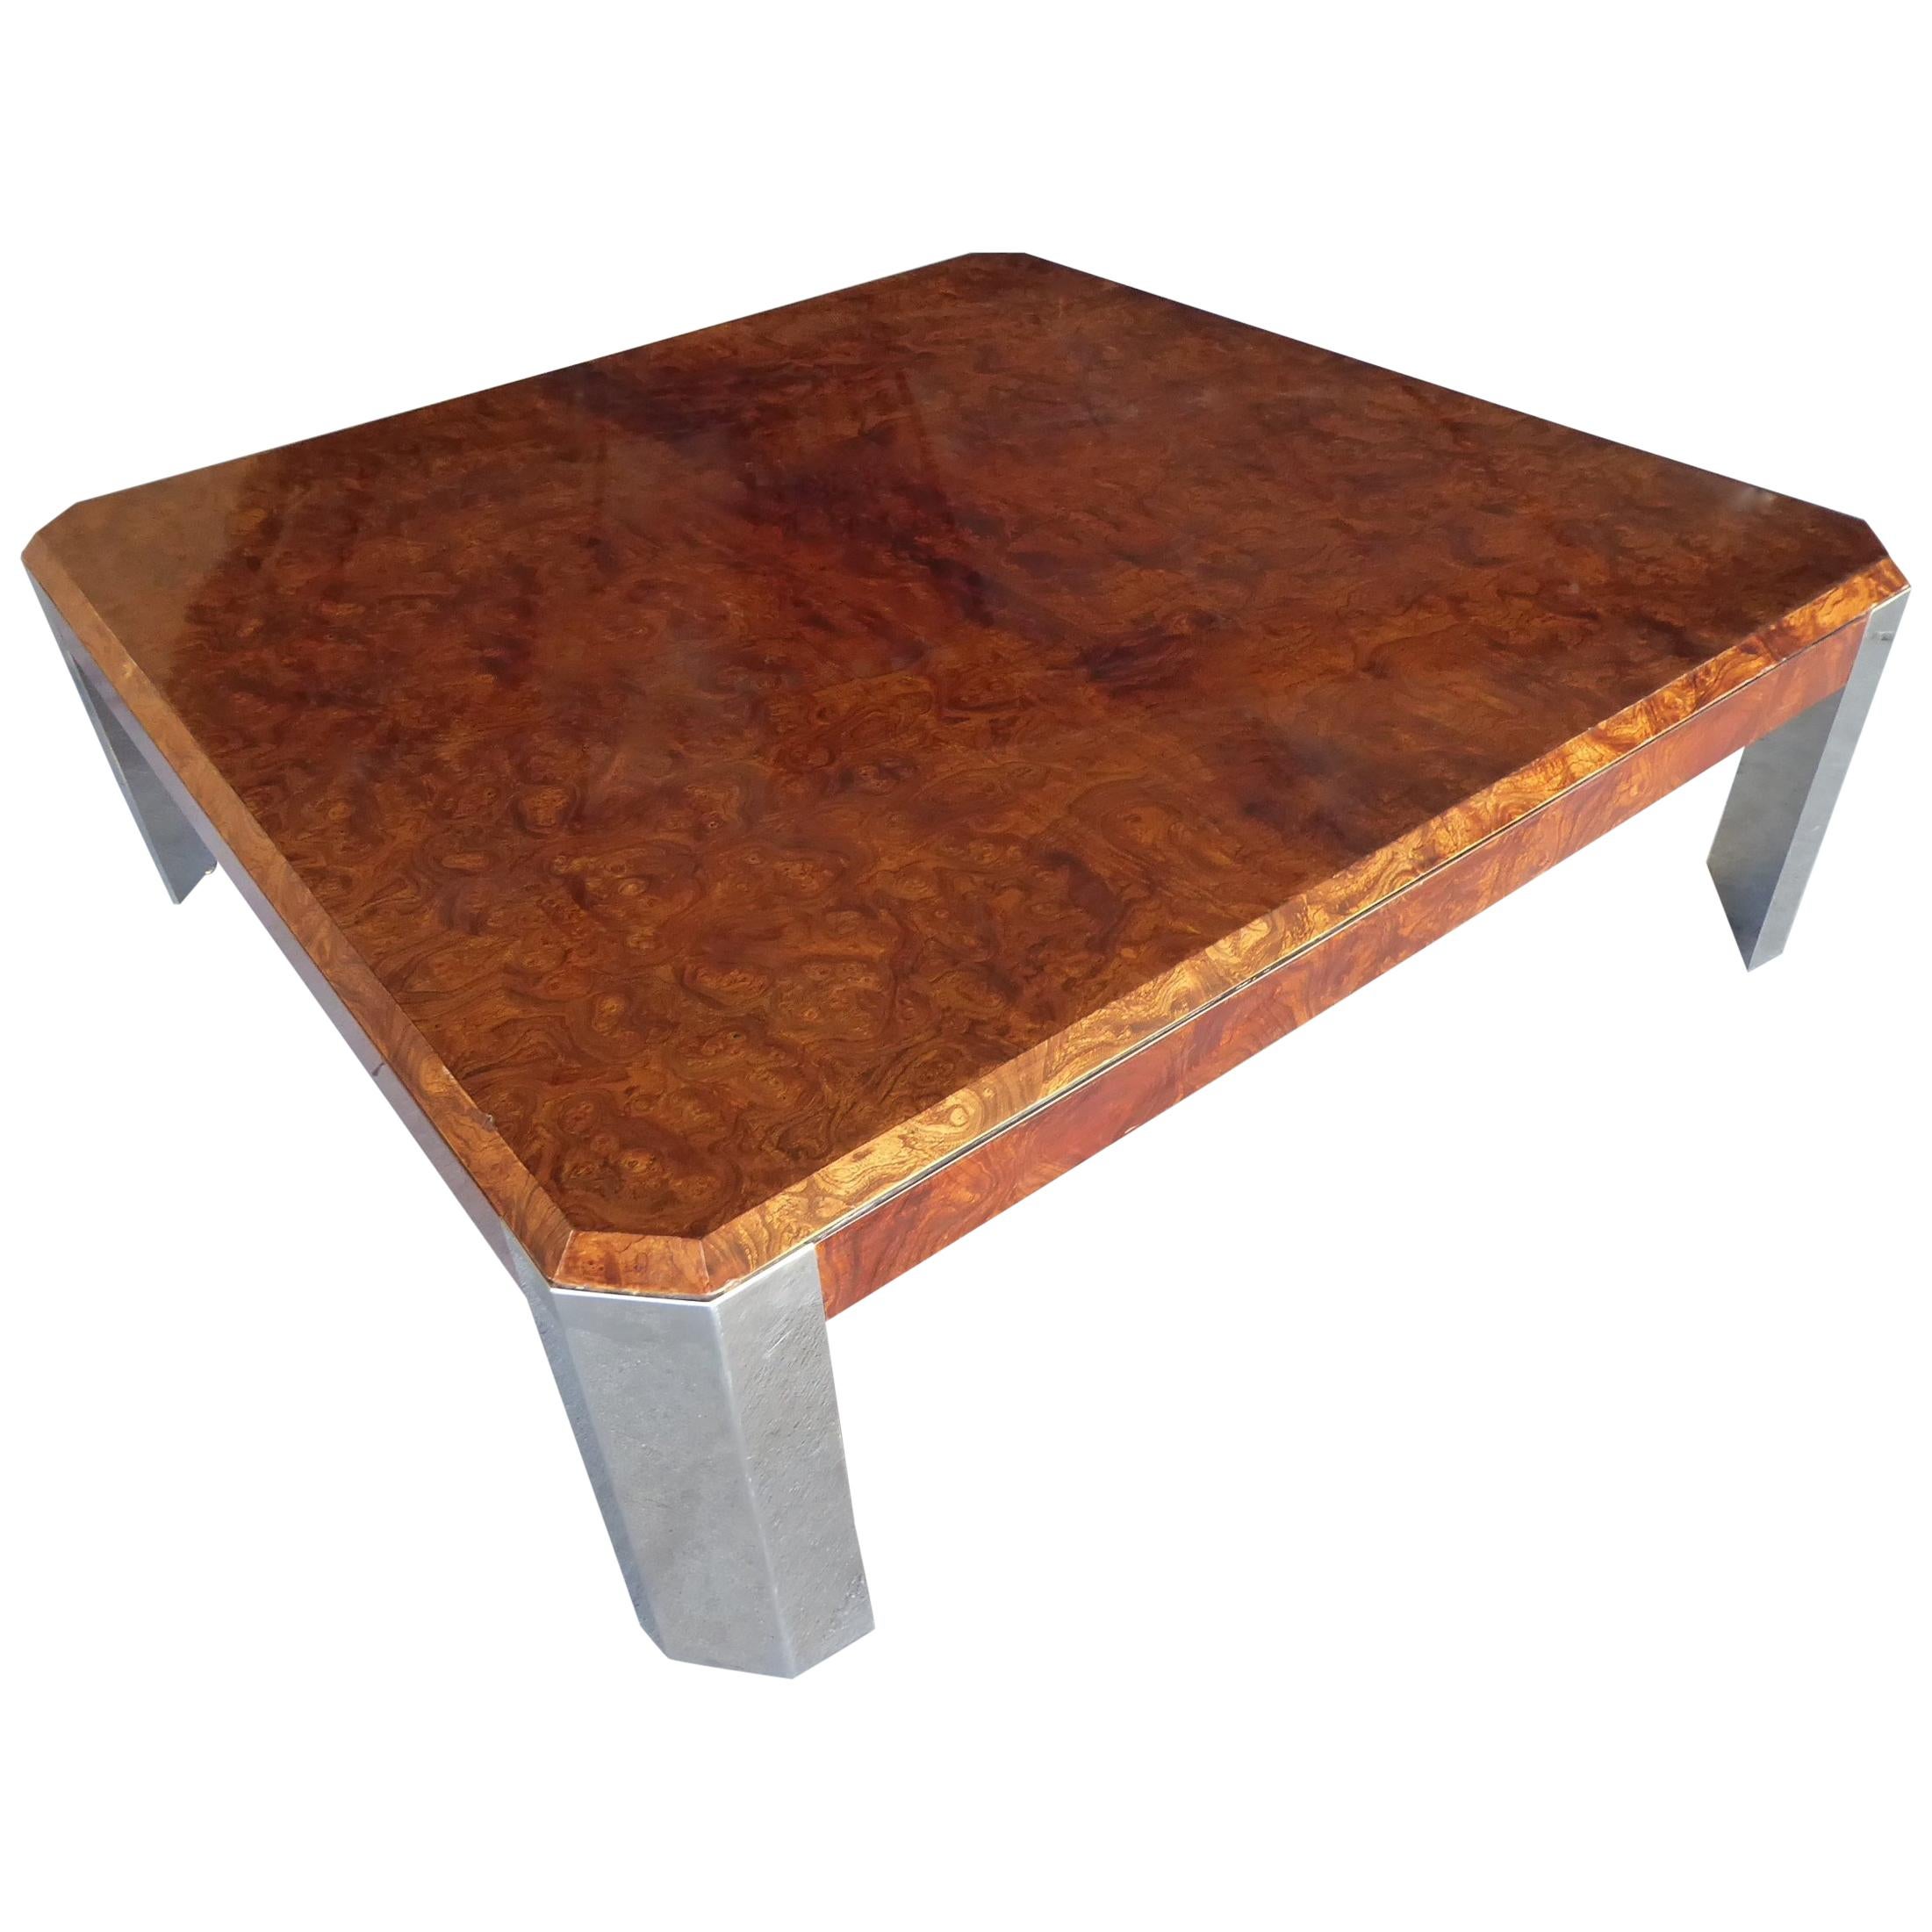 Burled Walnut and Chromed Steel Coffee Table Designed by Leon Rosen for Pace For Sale